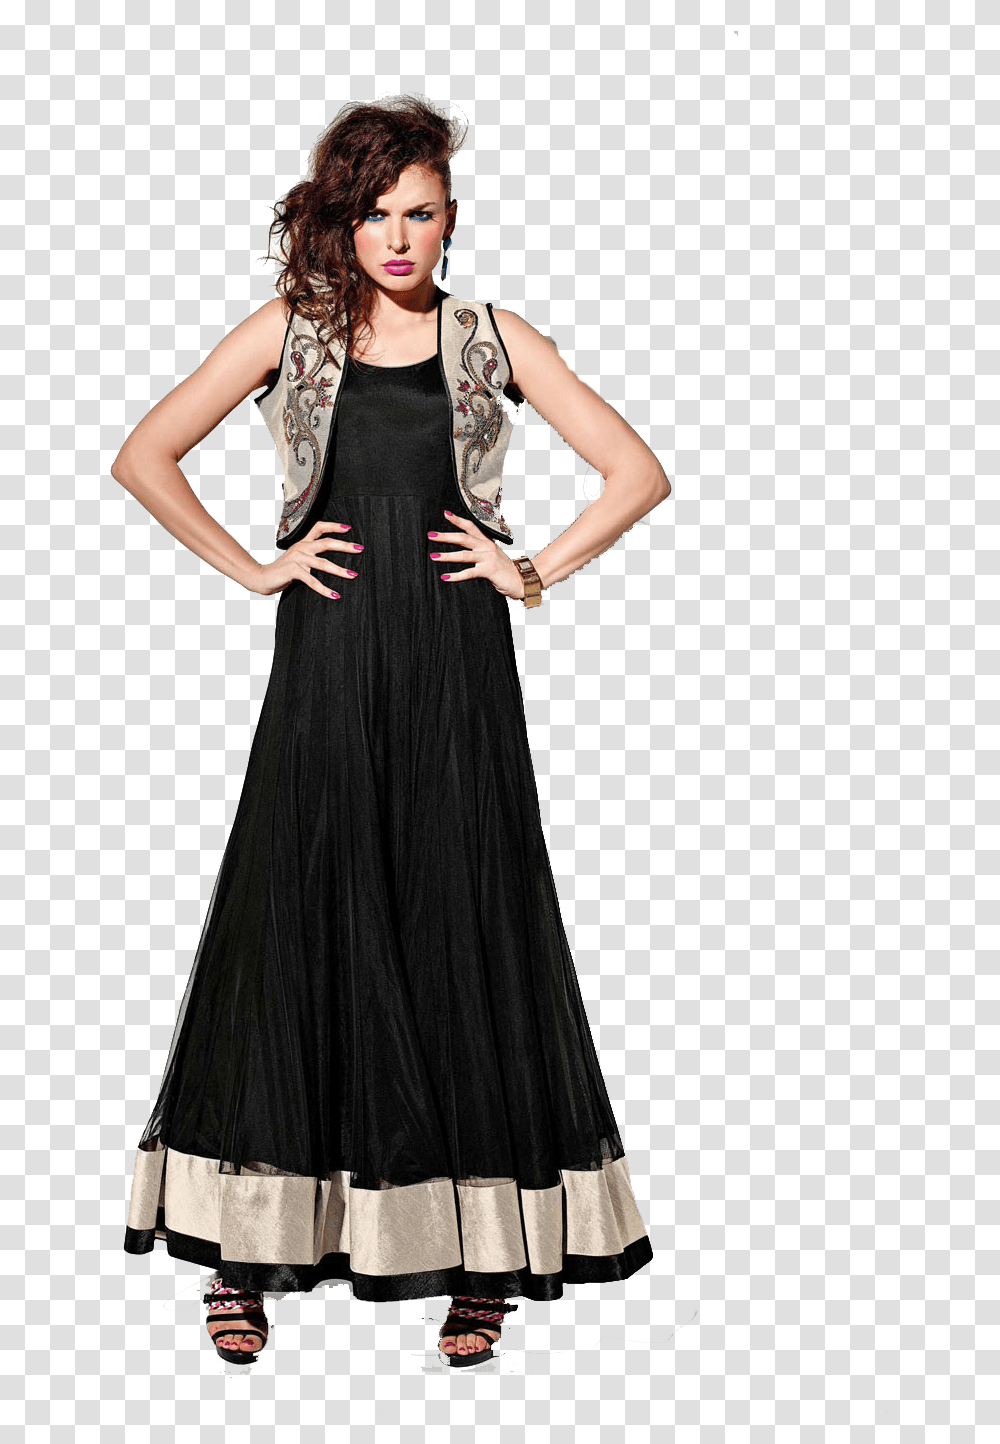 Jacket Frock Suit Free Pic Full Length Anarkali Suits With Jacket, Apparel, Evening Dress, Robe Transparent Png